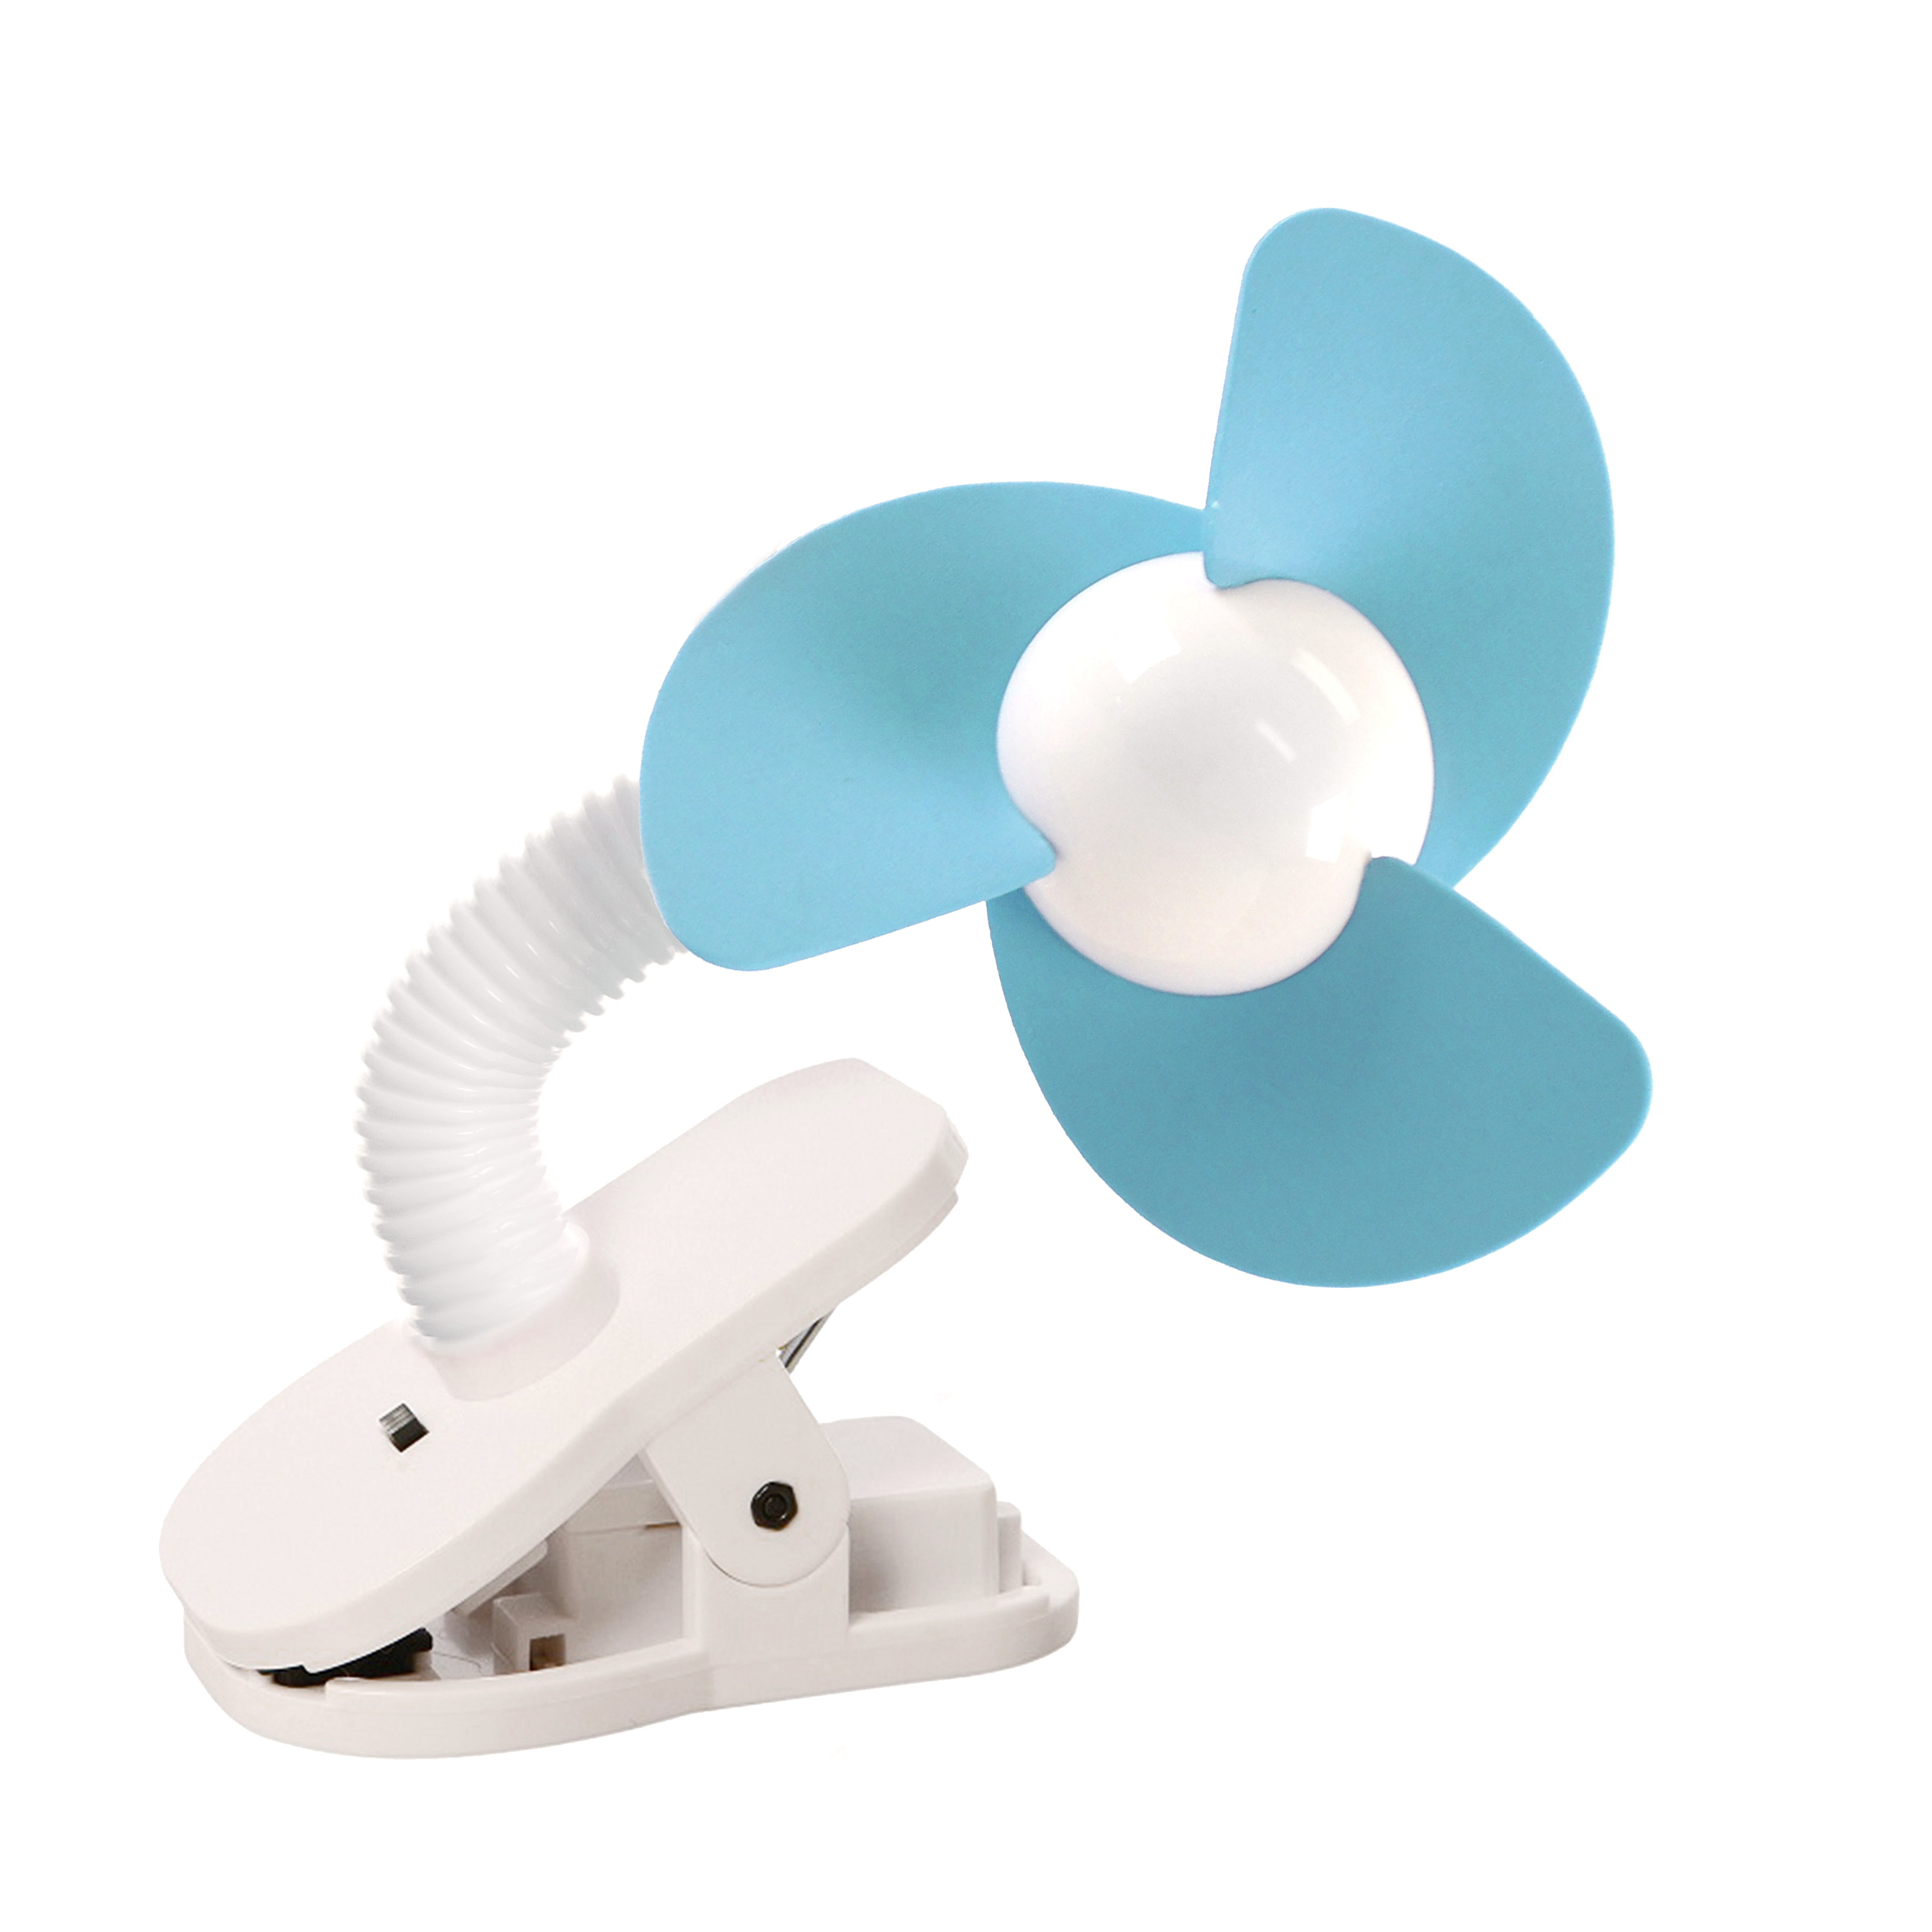 Dreambaby L230 Dreambaby Stroller Fan - Blue/White - Stroller Fan - Foam Fan - Attaches Easy - Great for On the Go Mom - Can be Used for Strollers - Cribs - In the Car and More - image 4 of 11